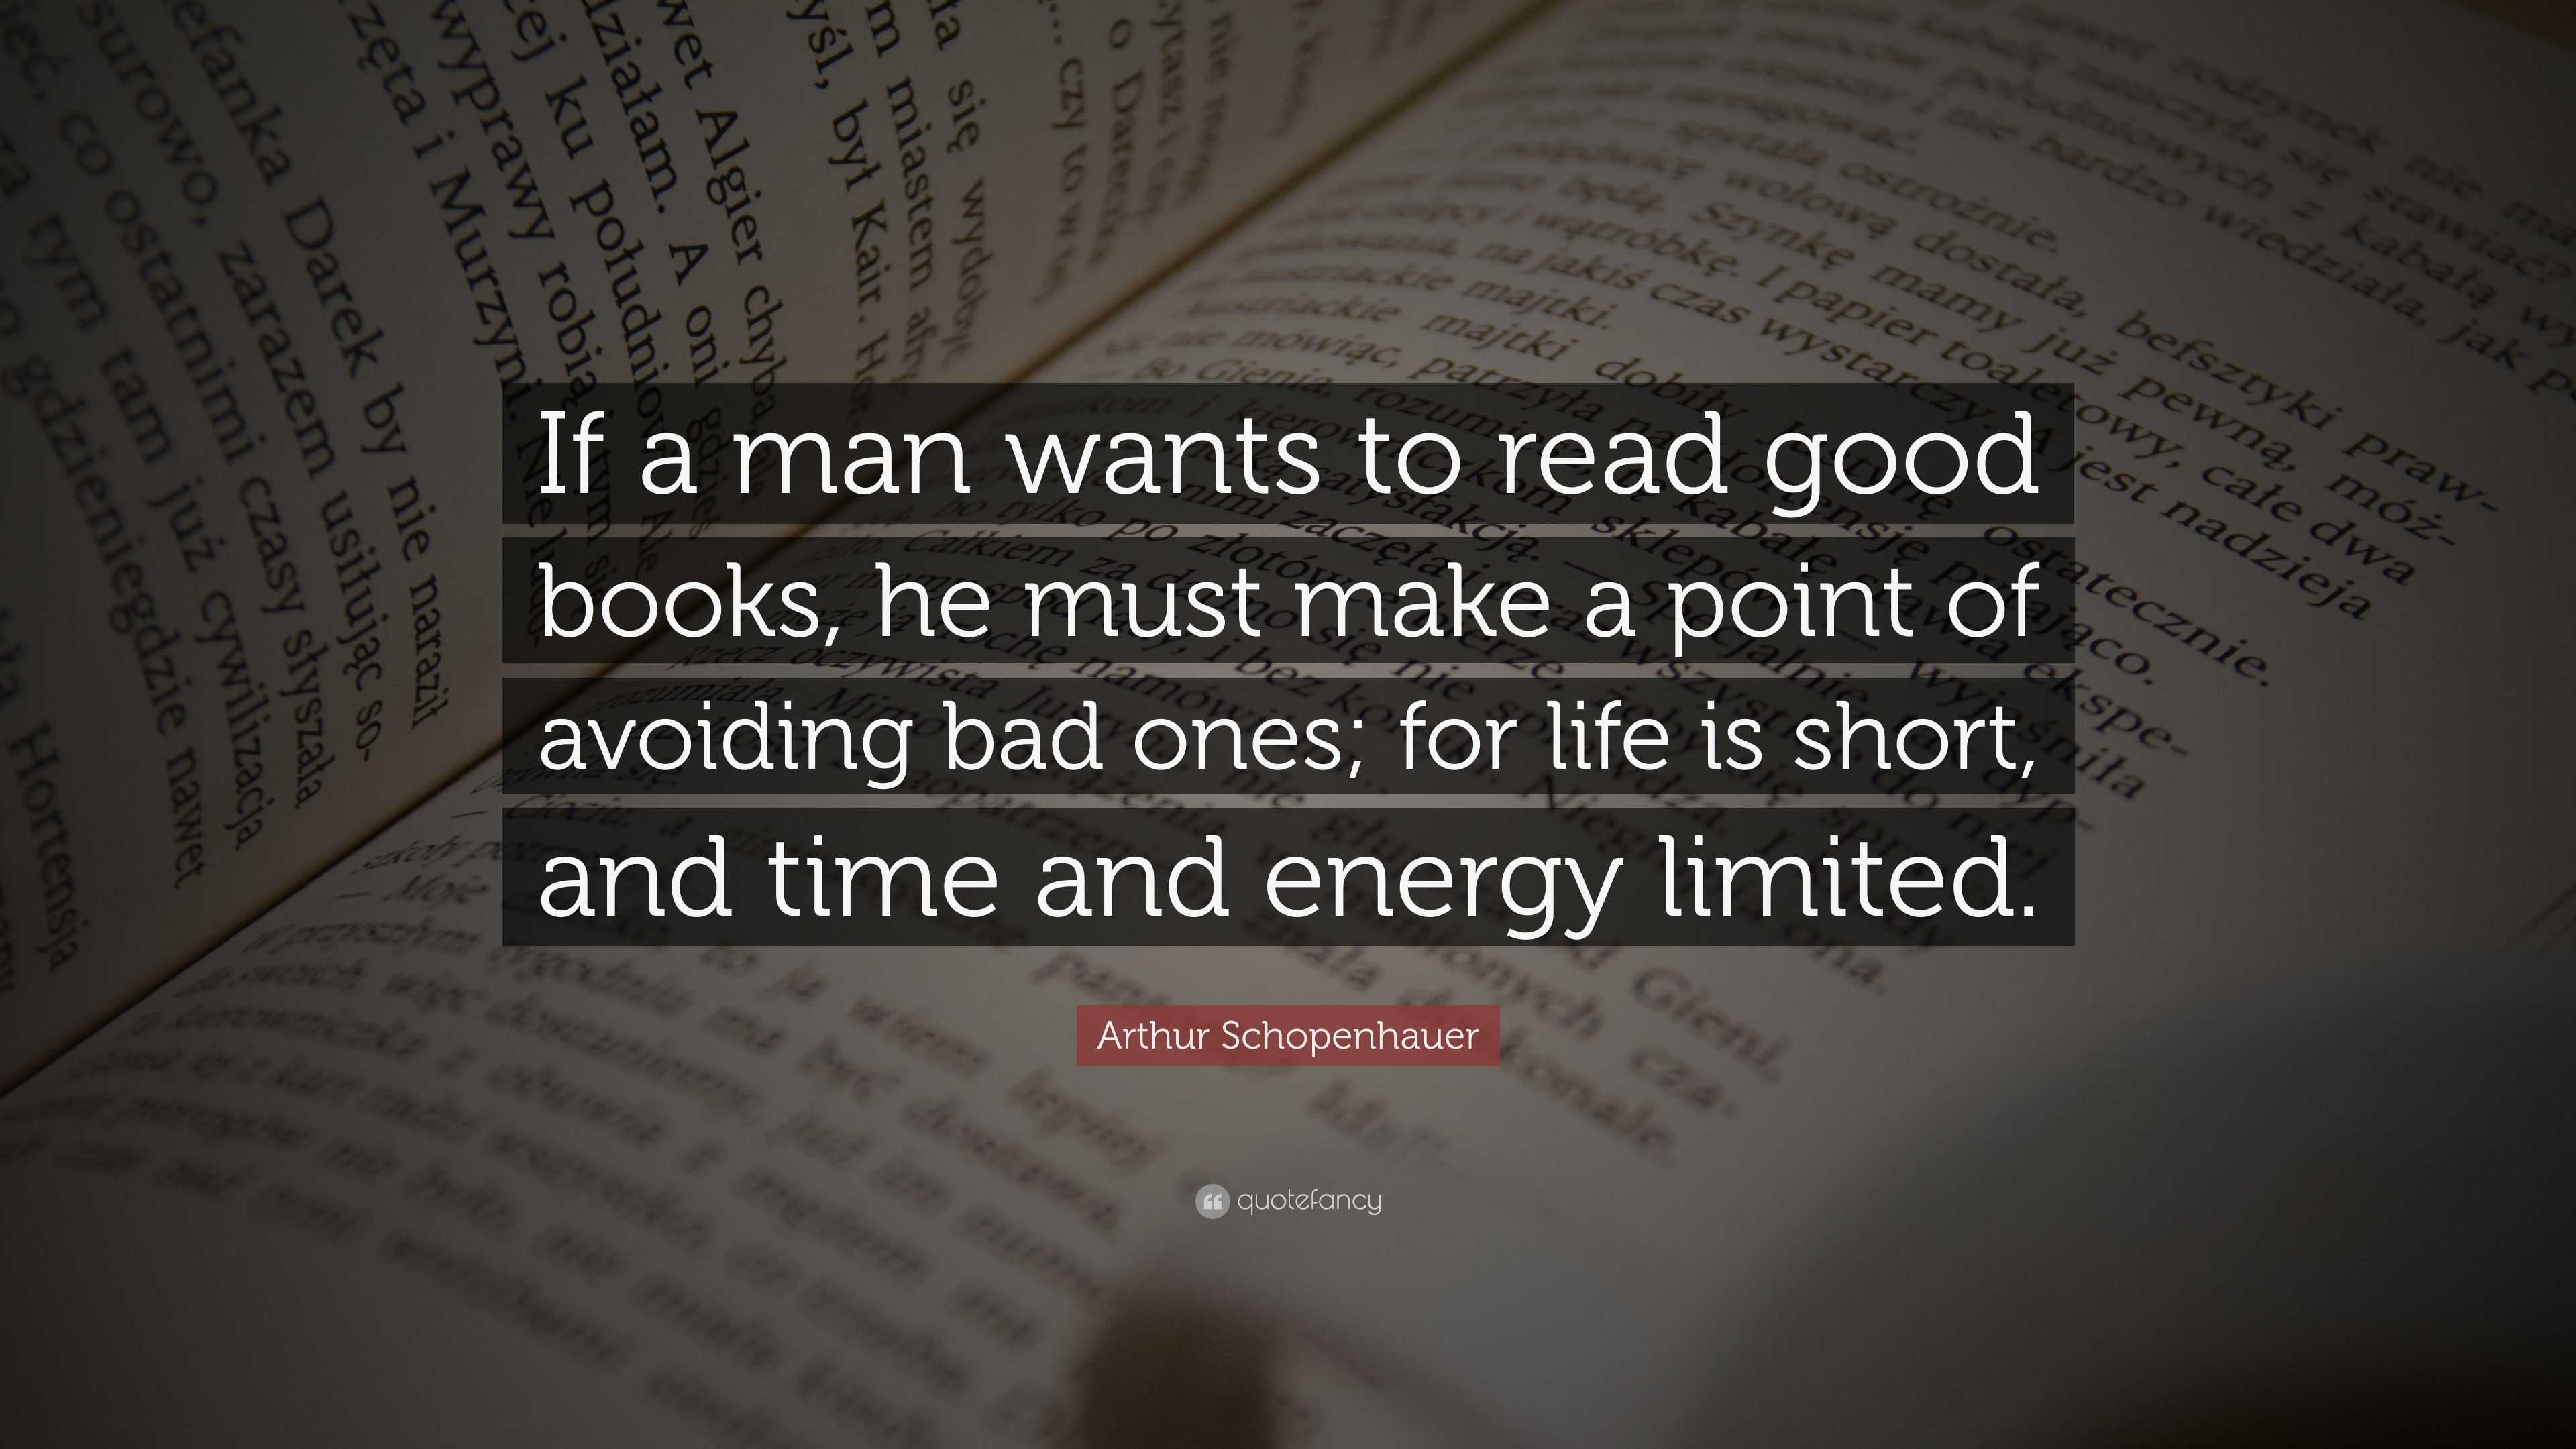 Arthur Schopenhauer Quote: “If a man wants to read good books, he must ...